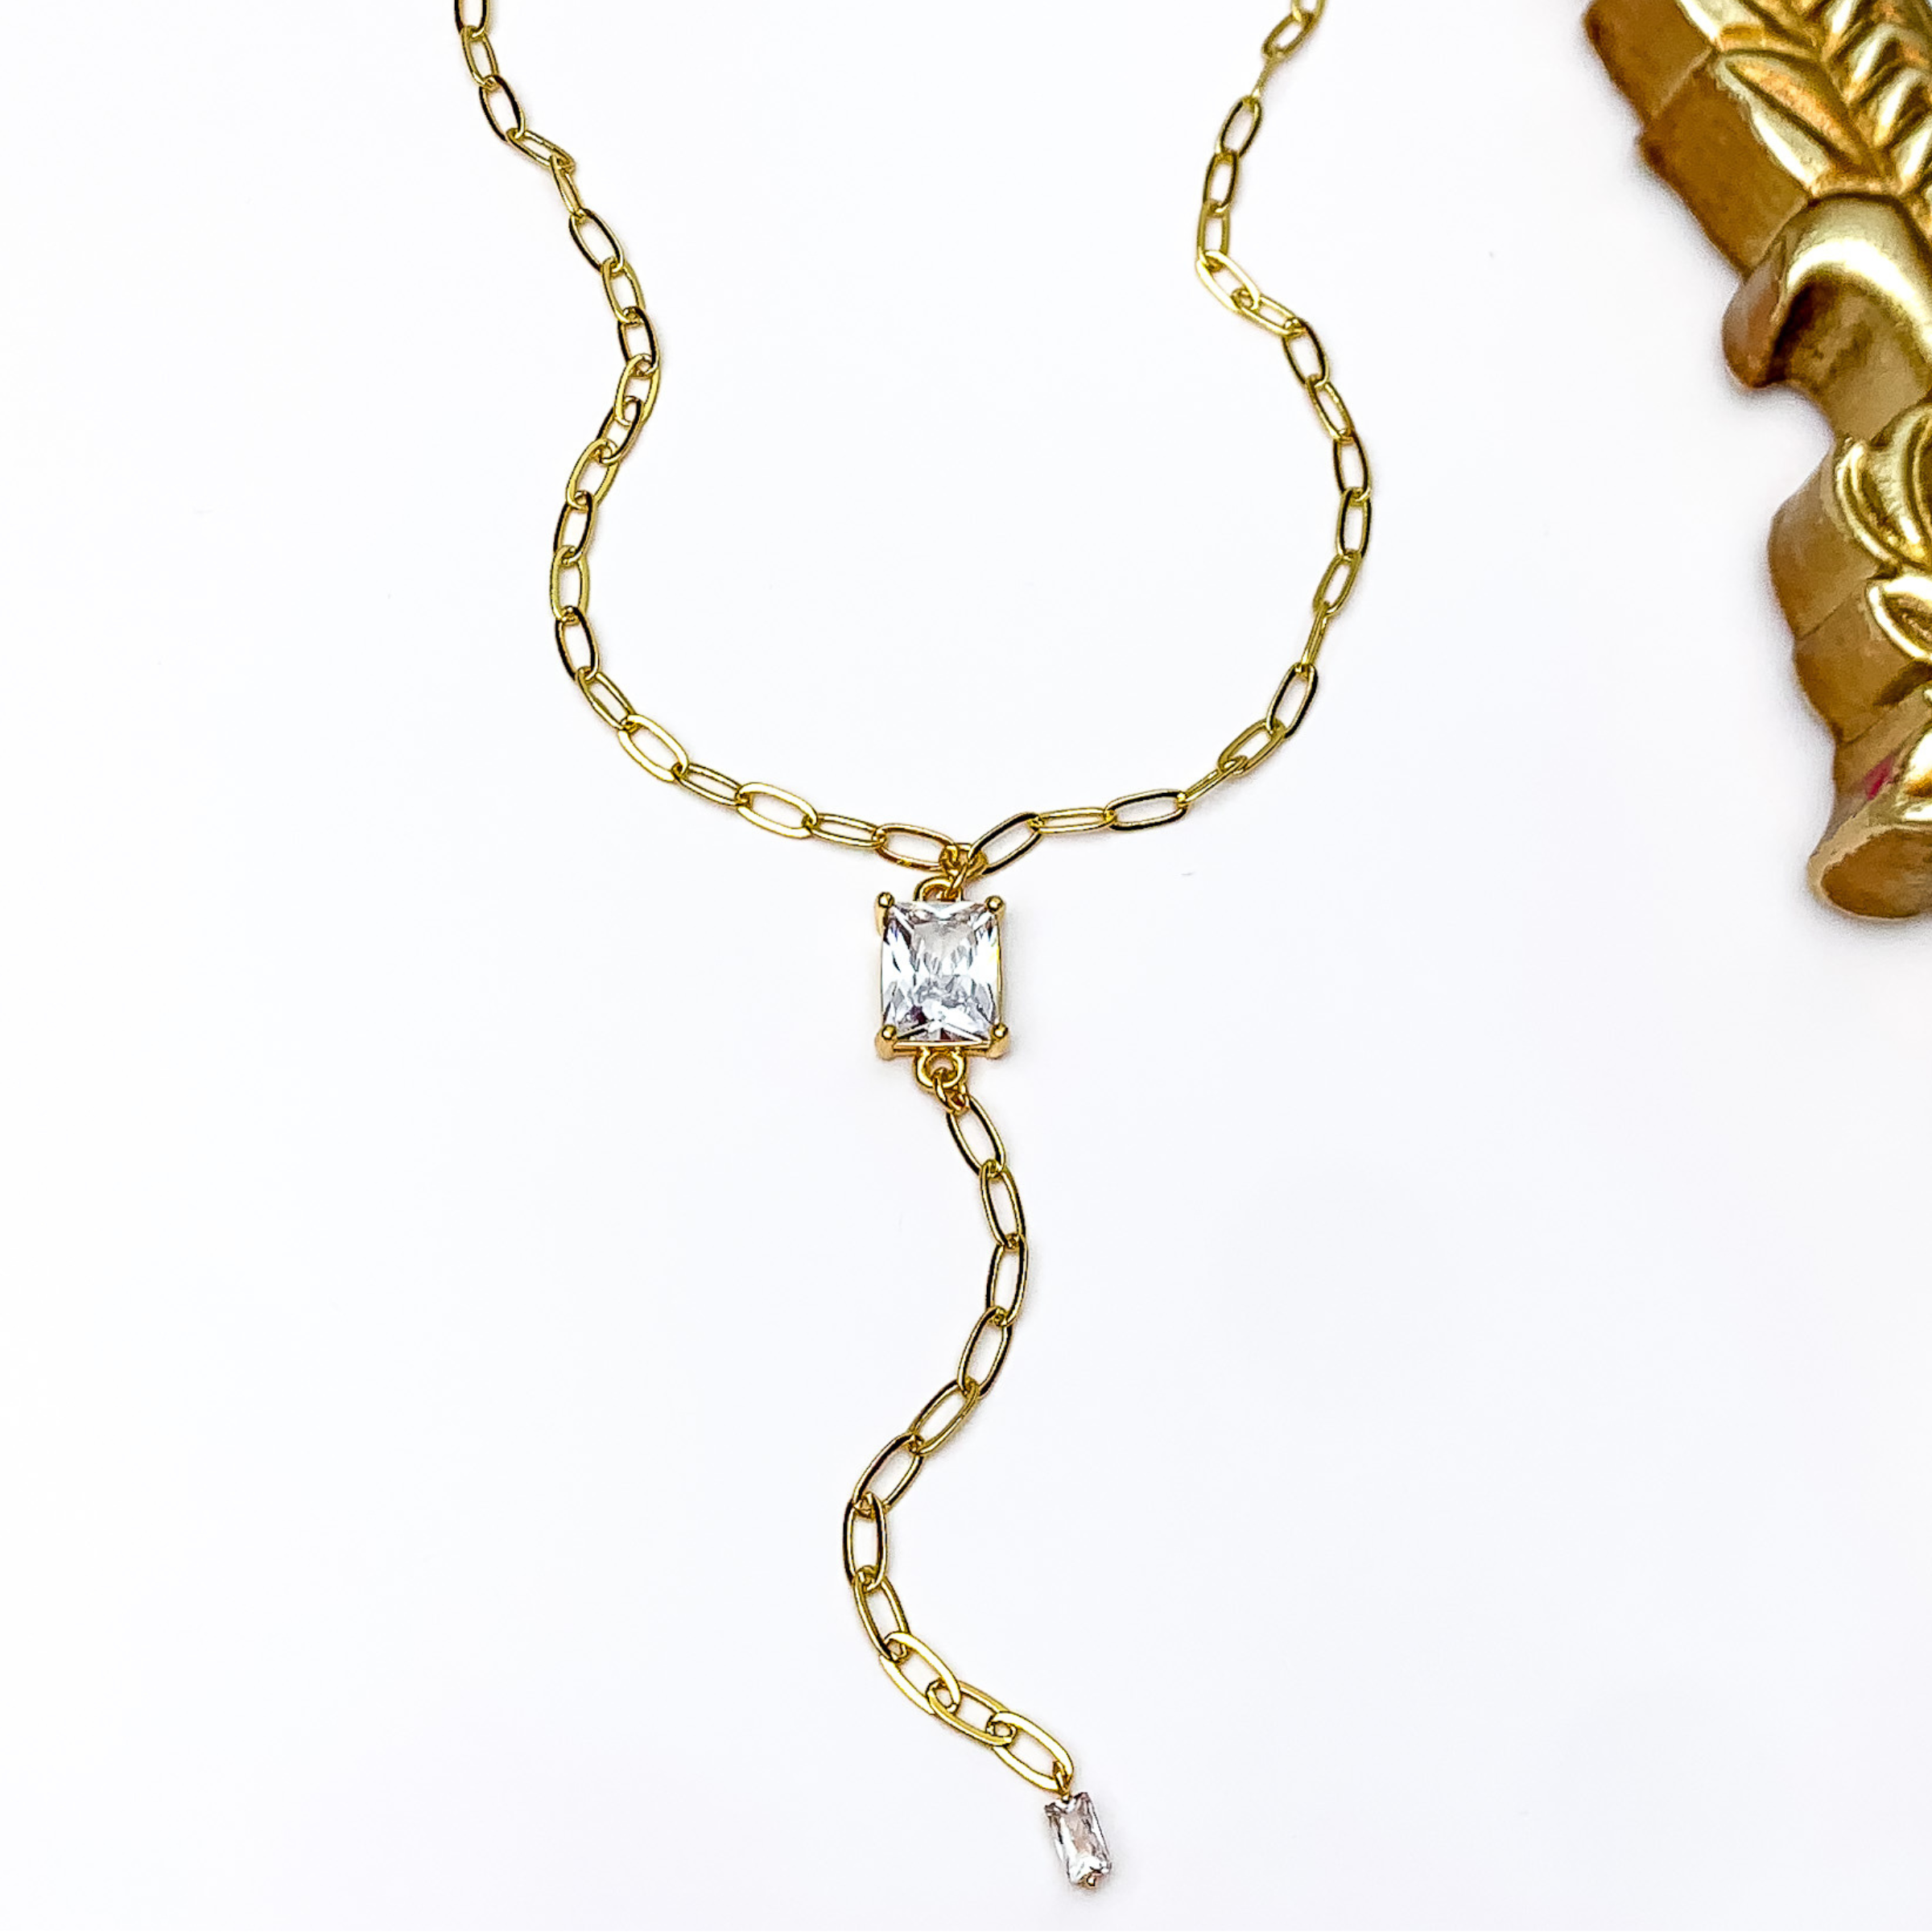 Pictured is a gold chain lariat neckalce with a rectabgle, clear crystal pendant and gold chain drop. This necklace is pictured on a white background with a gold mirror in the top right corner.  